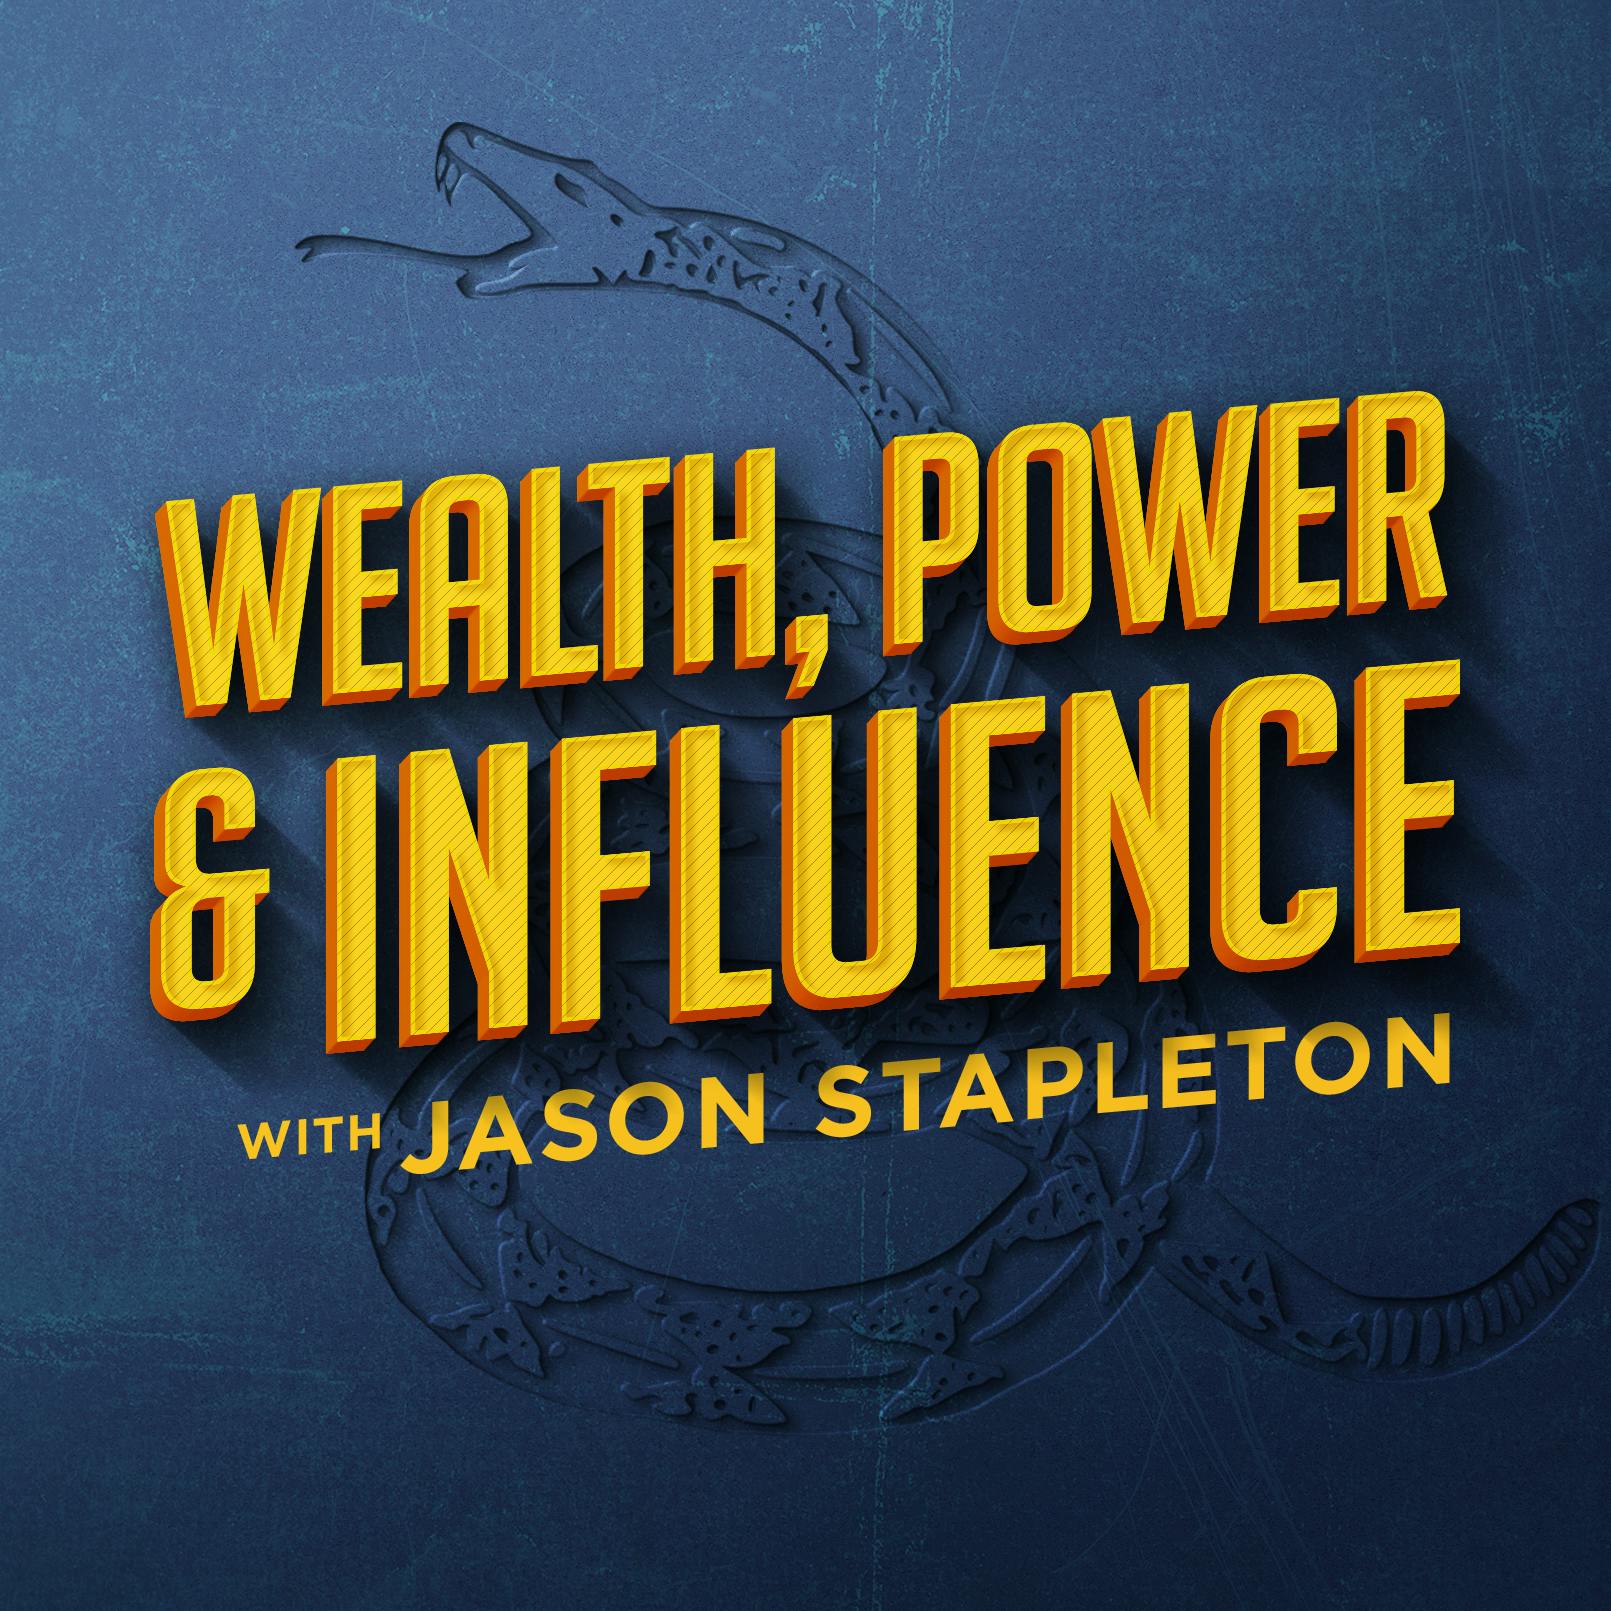 The Power of influence. Influence power